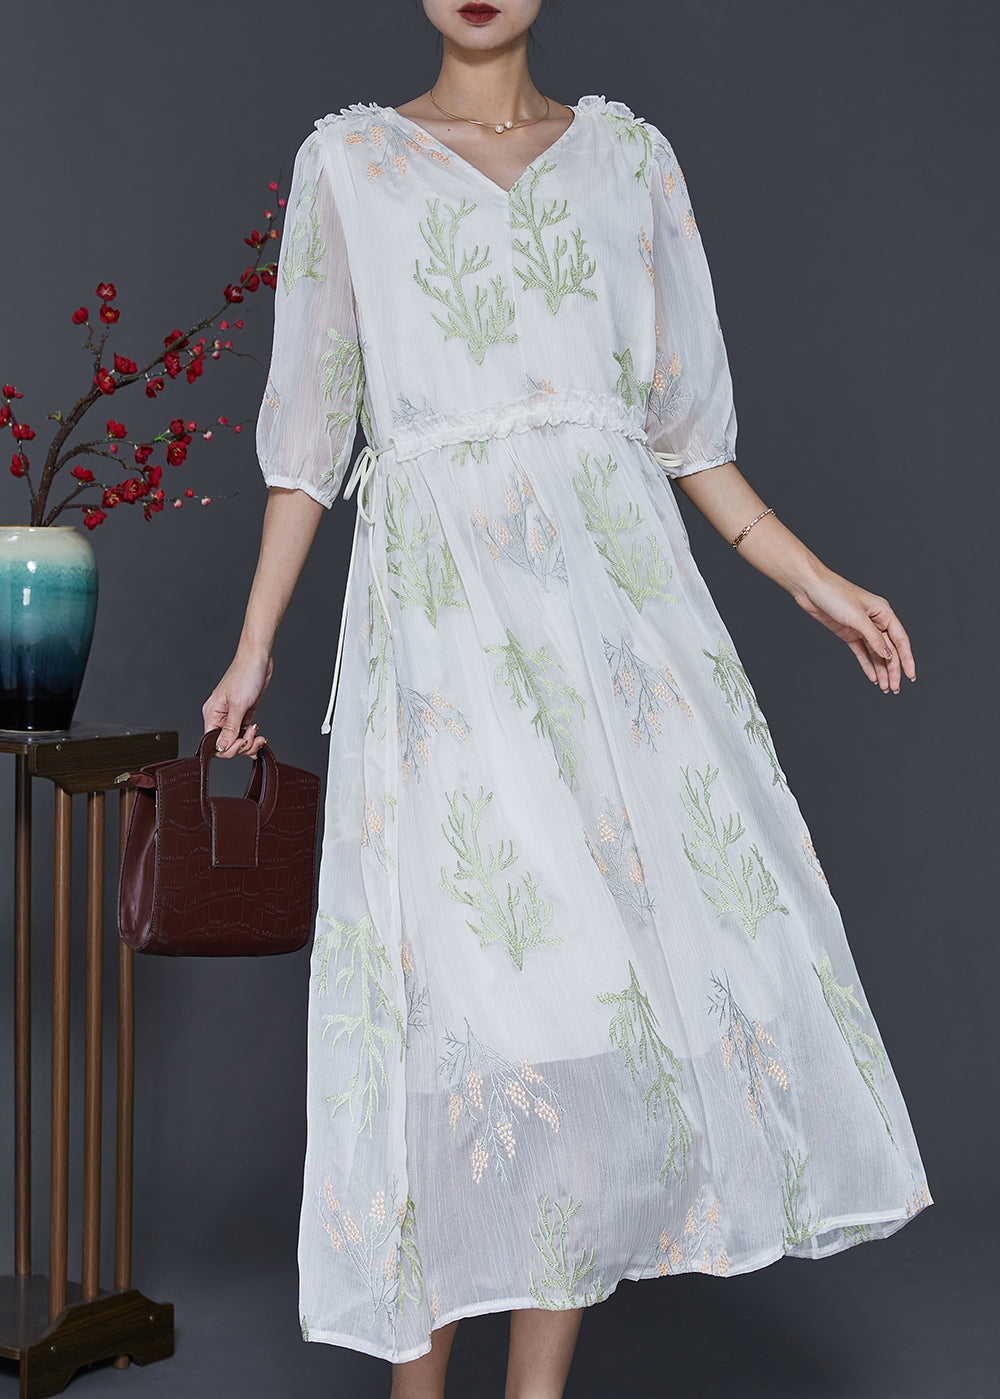 Fine White Embroidered Silk Cinched Dress Summer